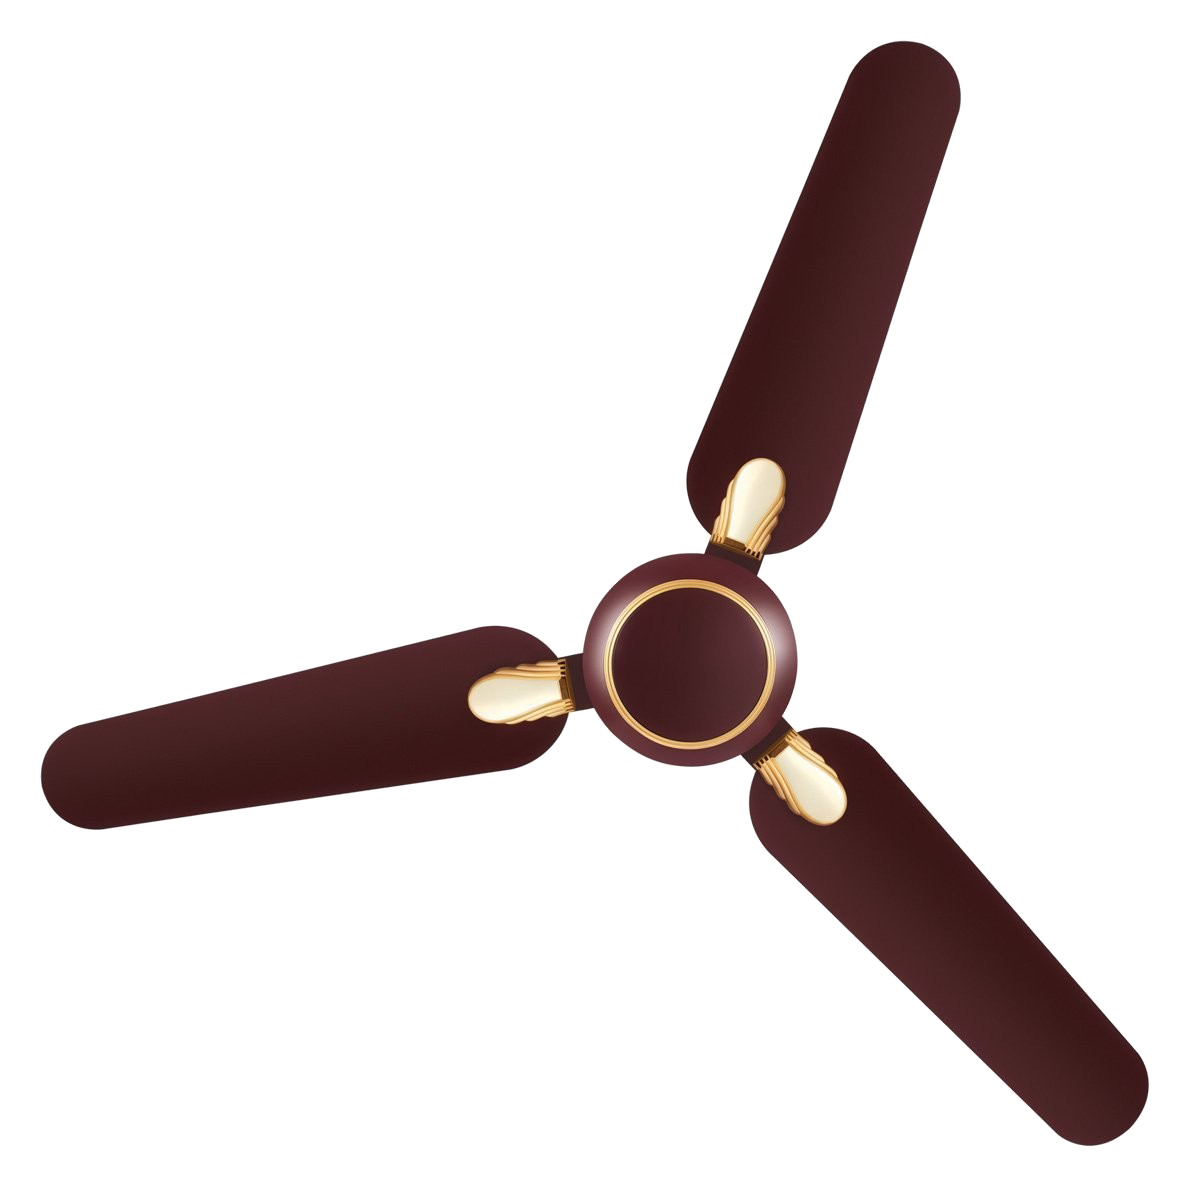 Ceiling Fan Image PNG Download Free PNG Image